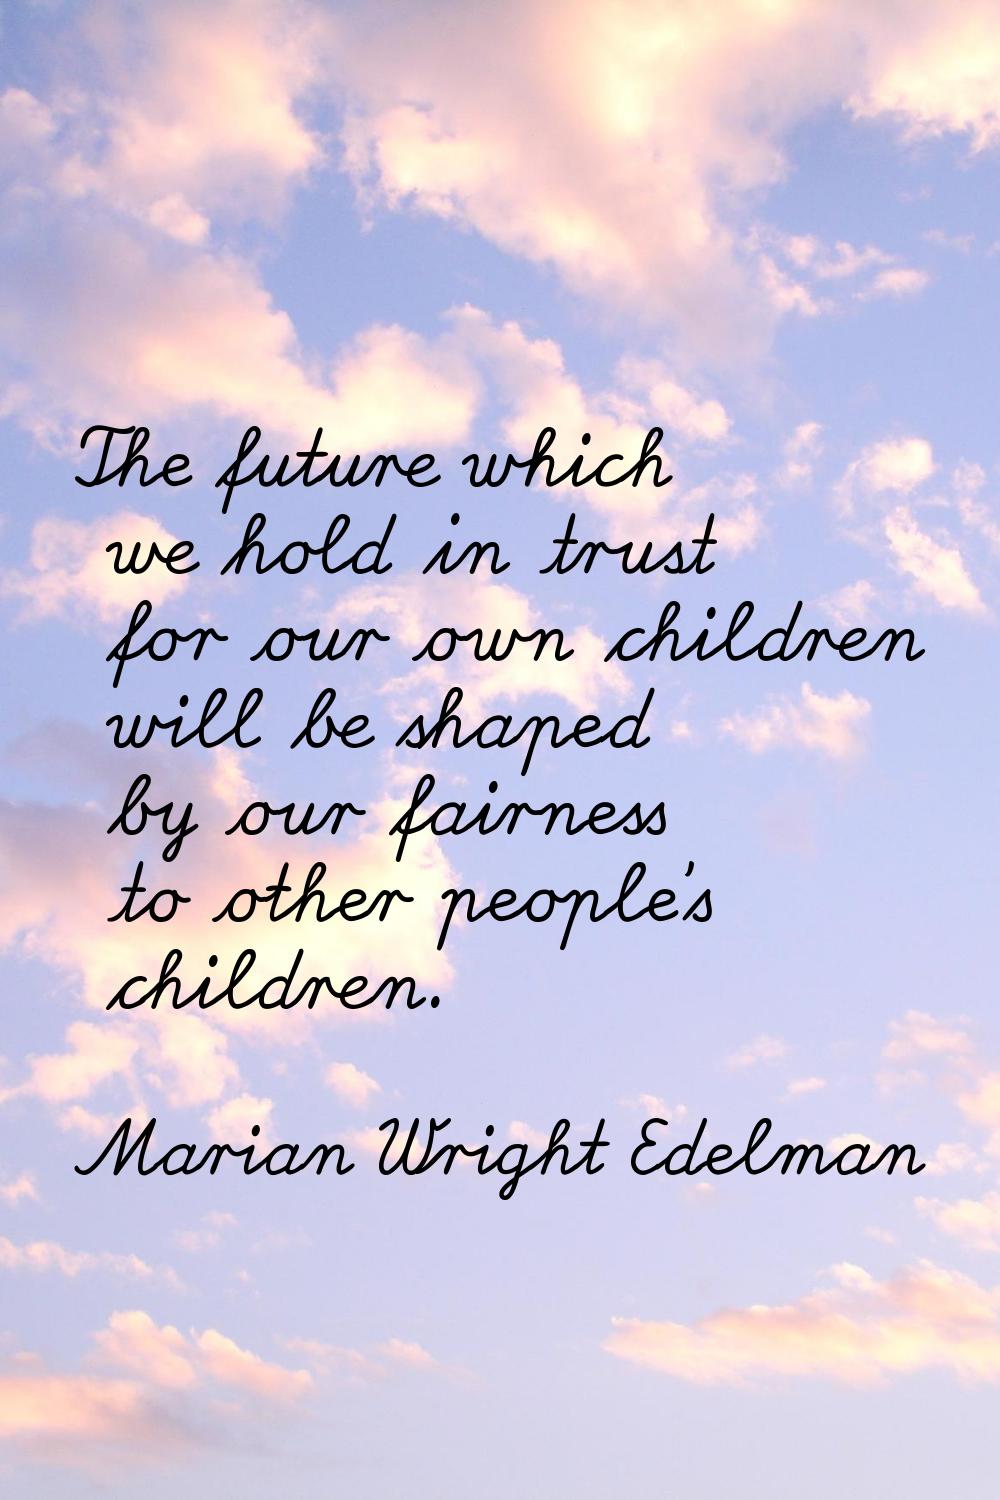 The future which we hold in trust for our own children will be shaped by our fairness to other peop